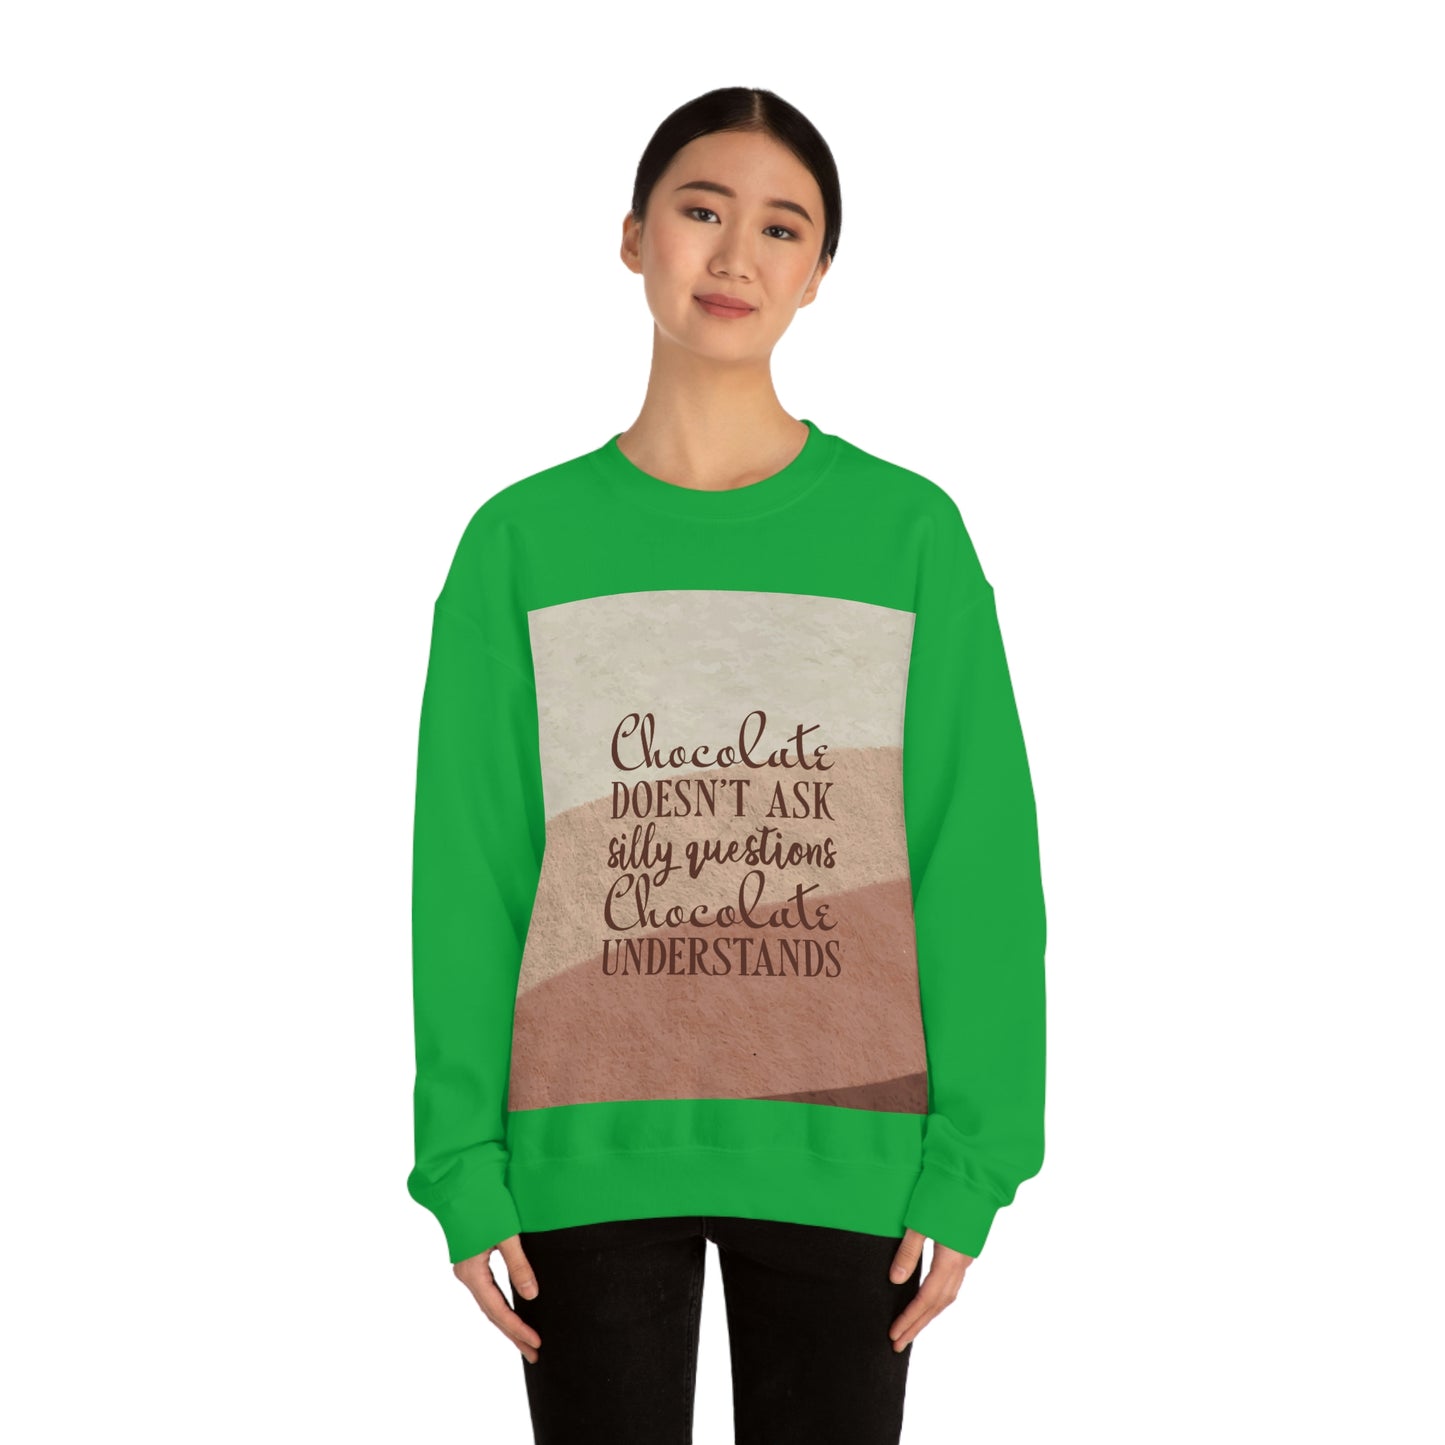 Chocolate Doesn’t Ask Questions Indulge in the Sweetness  Unisex Heavy Blend™ Crewneck Sweatshirt